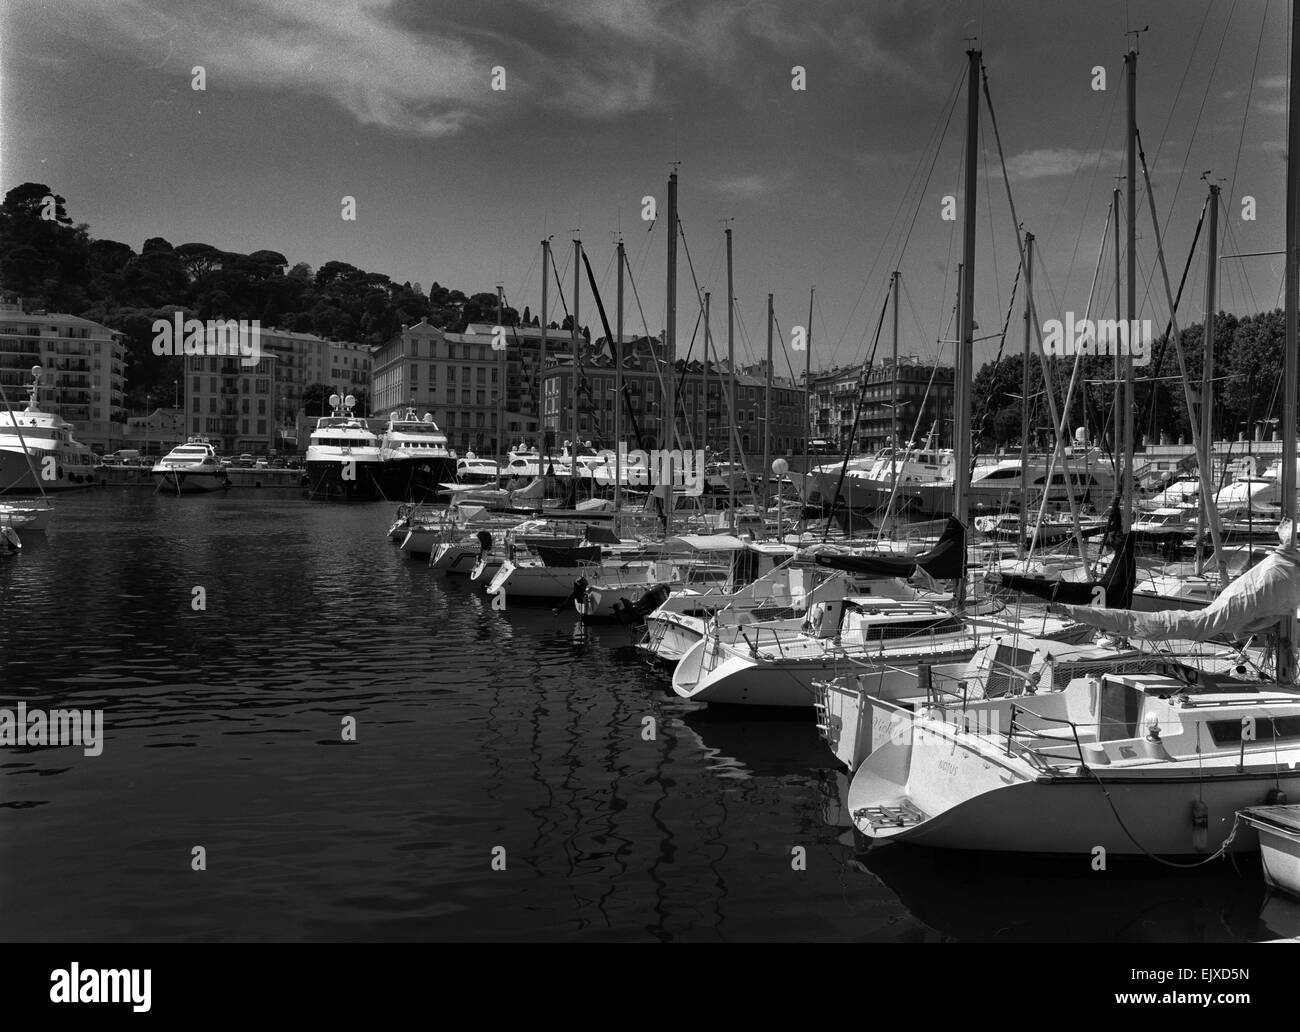 Horizontal medium format monochrome shot of a marina filled with luxury yachts and sail boats. Stock Photo